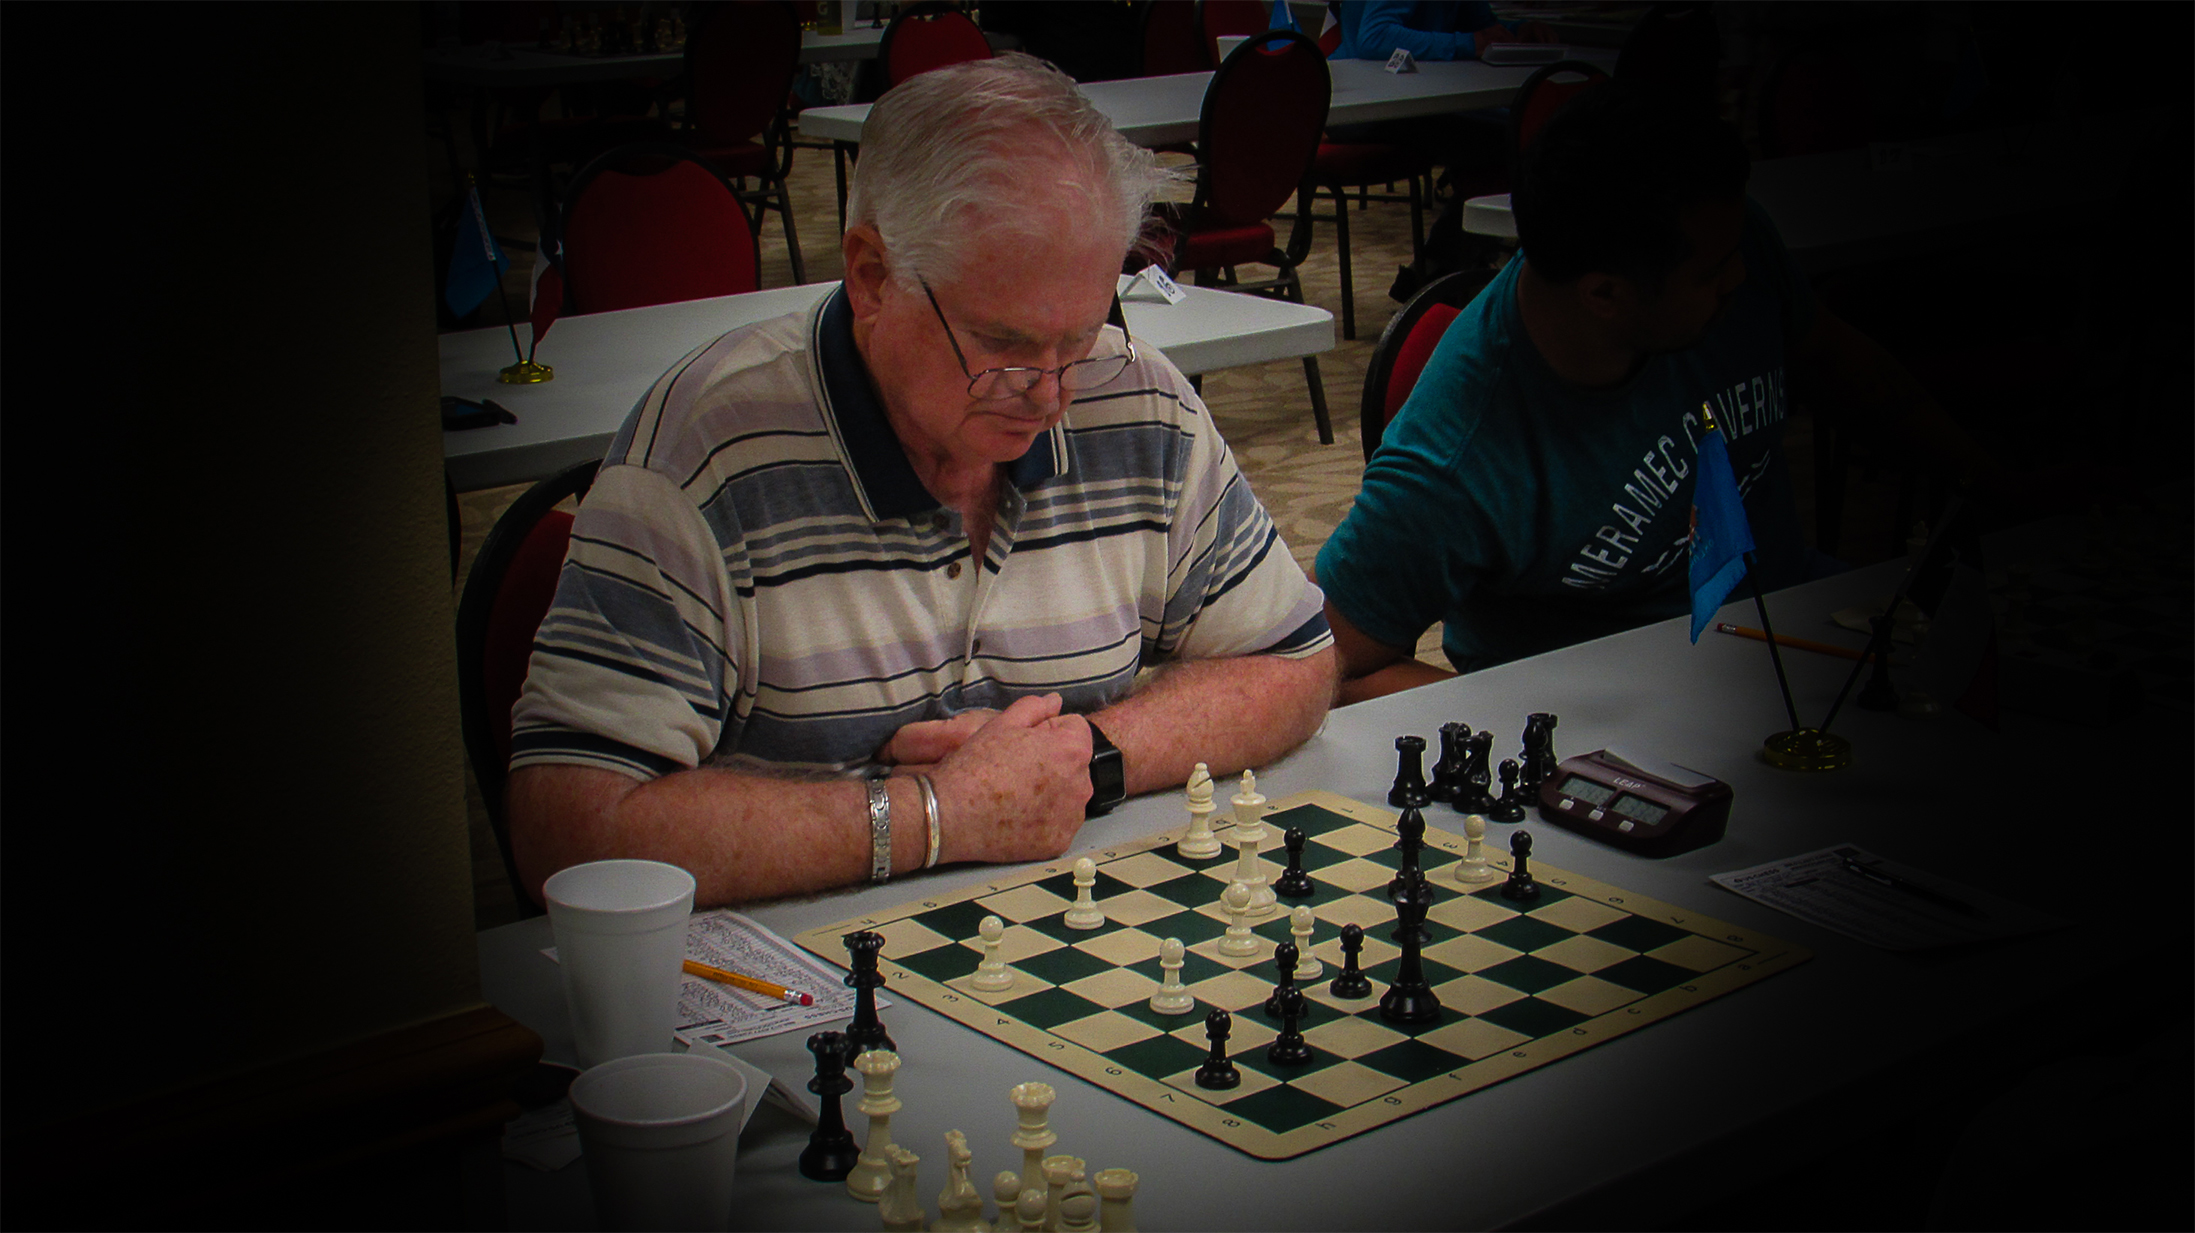 Larry Deputy is a US Chess Life Member and has an 1838 FIDE rating.  He is ranked in the 86th Percentile for all USA chess players and in the 56th Percentile for all USA seniors.  He is ranked Number 56 in Oklahoma.  In RRSO XVII, his second RRSO, he split his match against a very tough Texan.  Photo by Mike Tubbs.